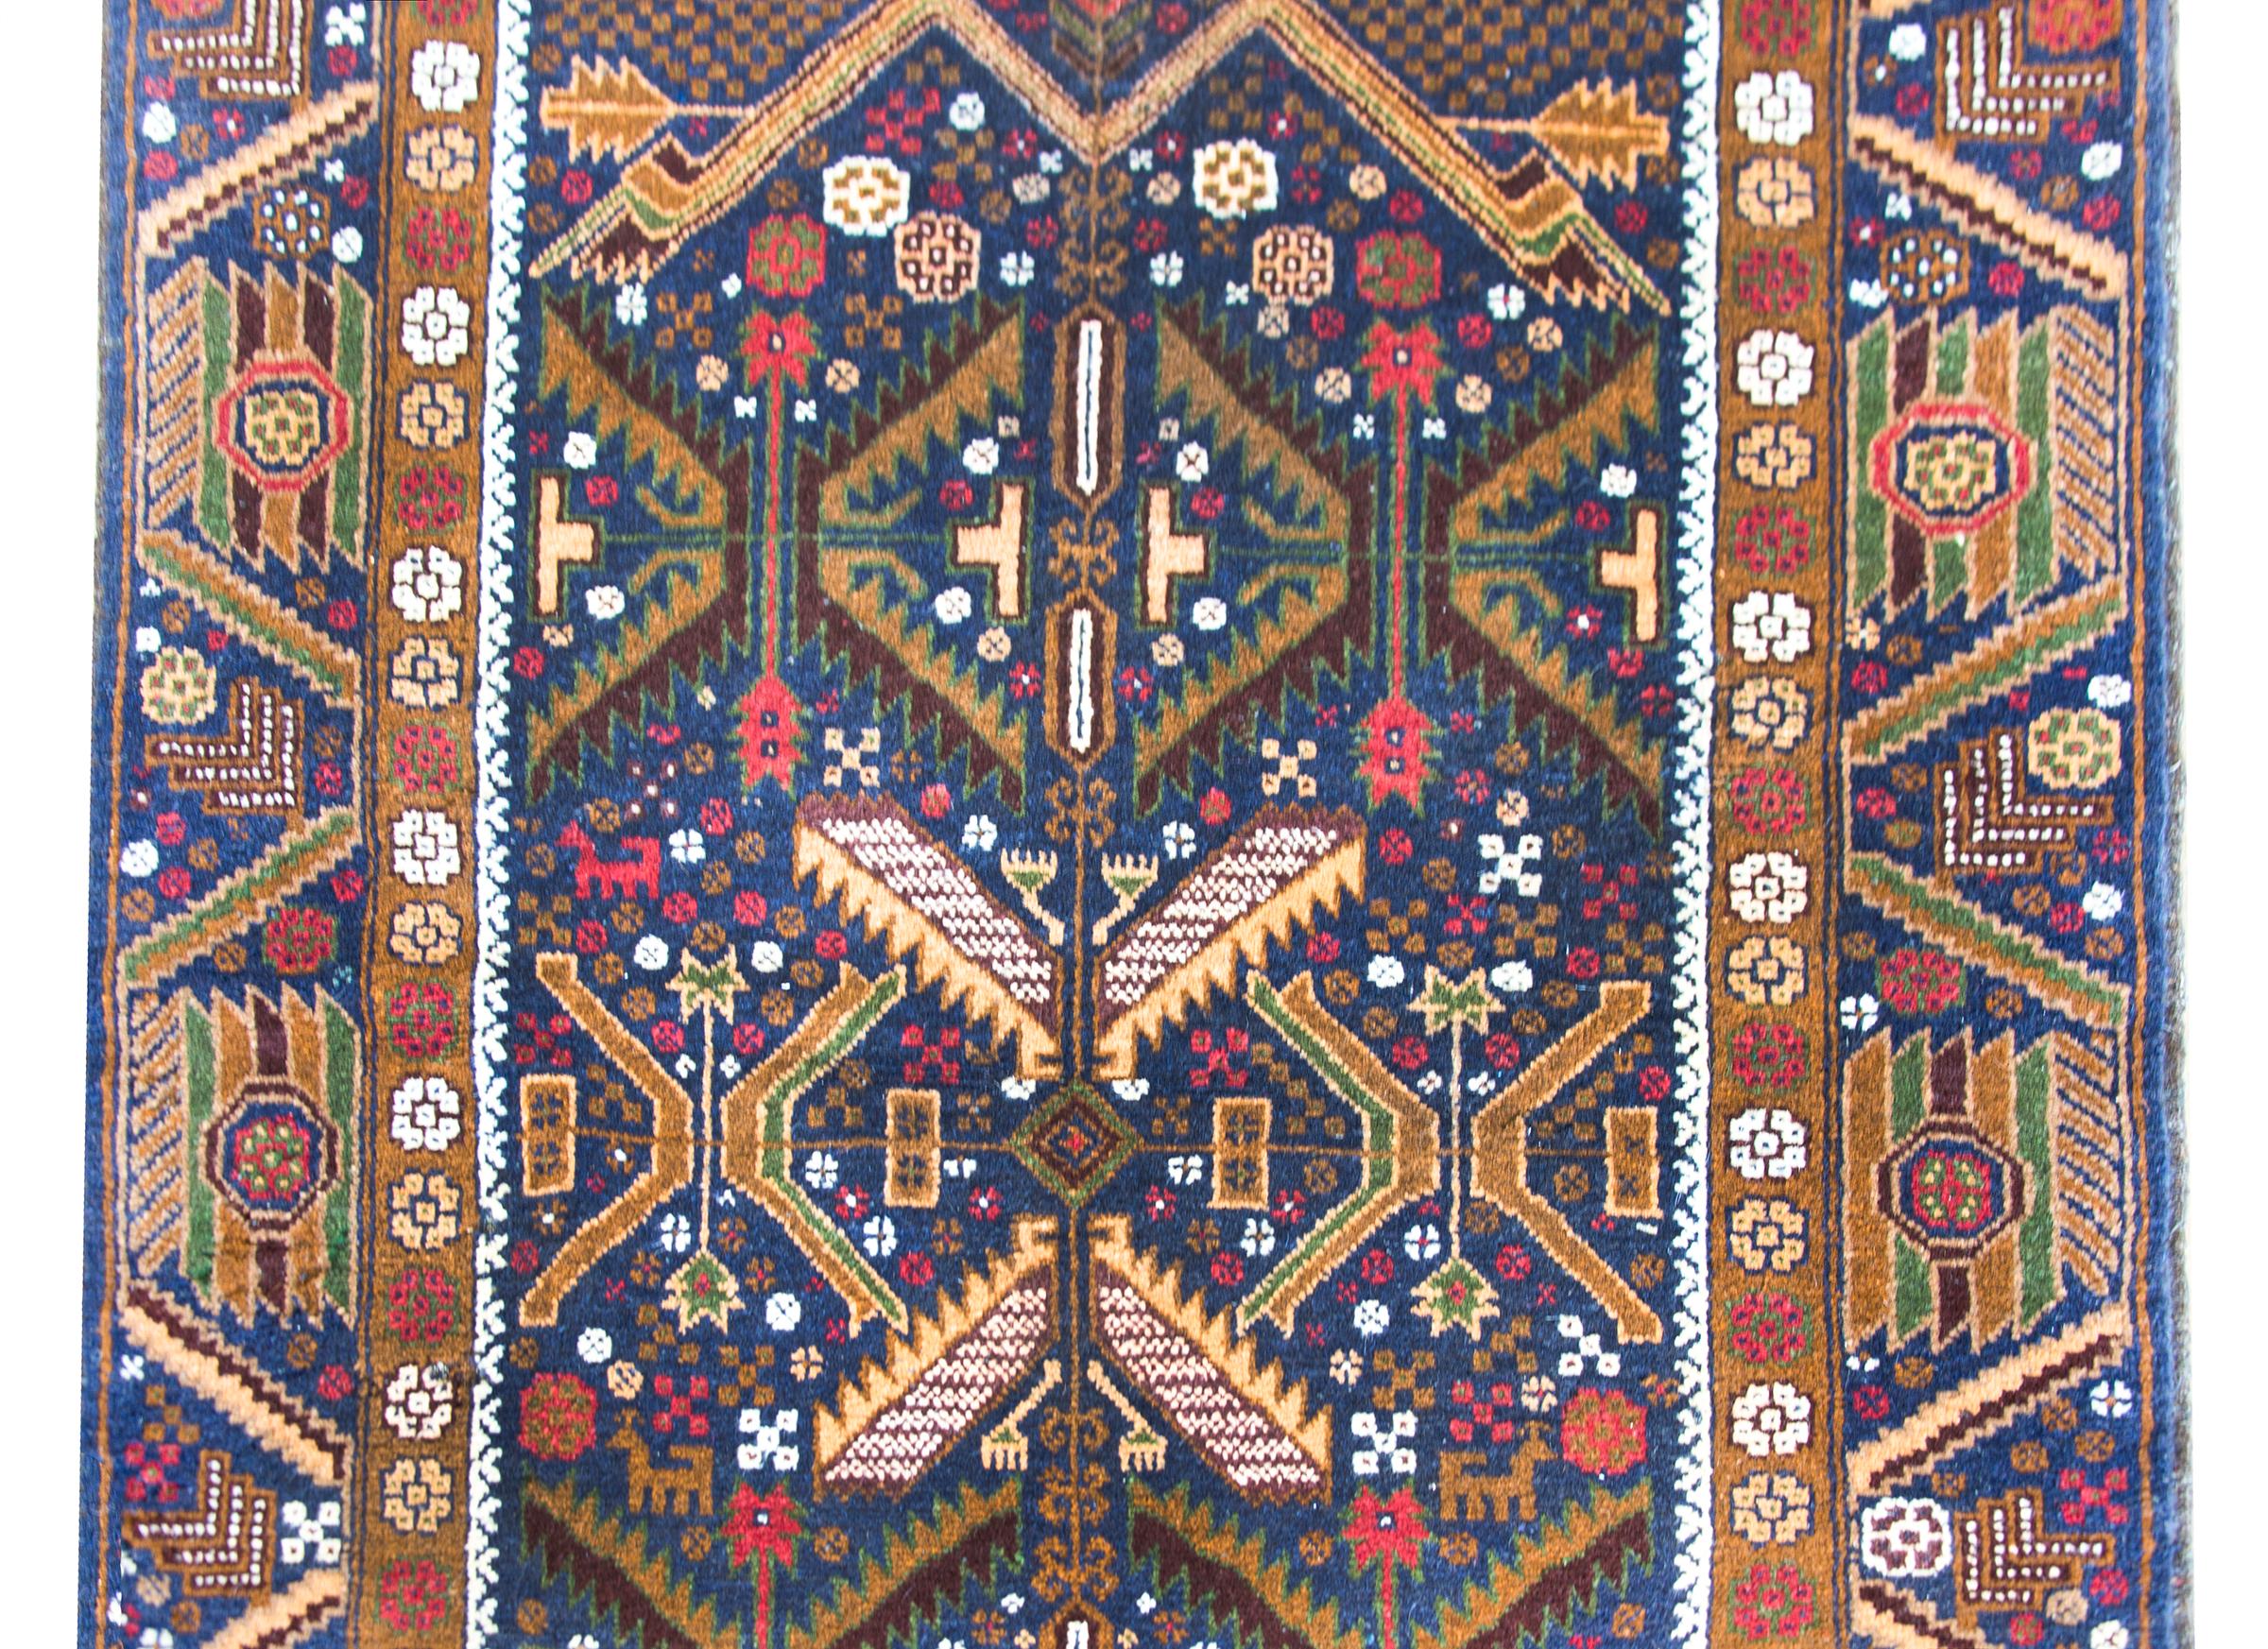 A wonderful vintage Afghani Baluch rug with a fantastic geometric pattern with stylized leaves, flowers, and chickens, and goats, and all surrounded by a wide border with more stylized flowers and leaves.